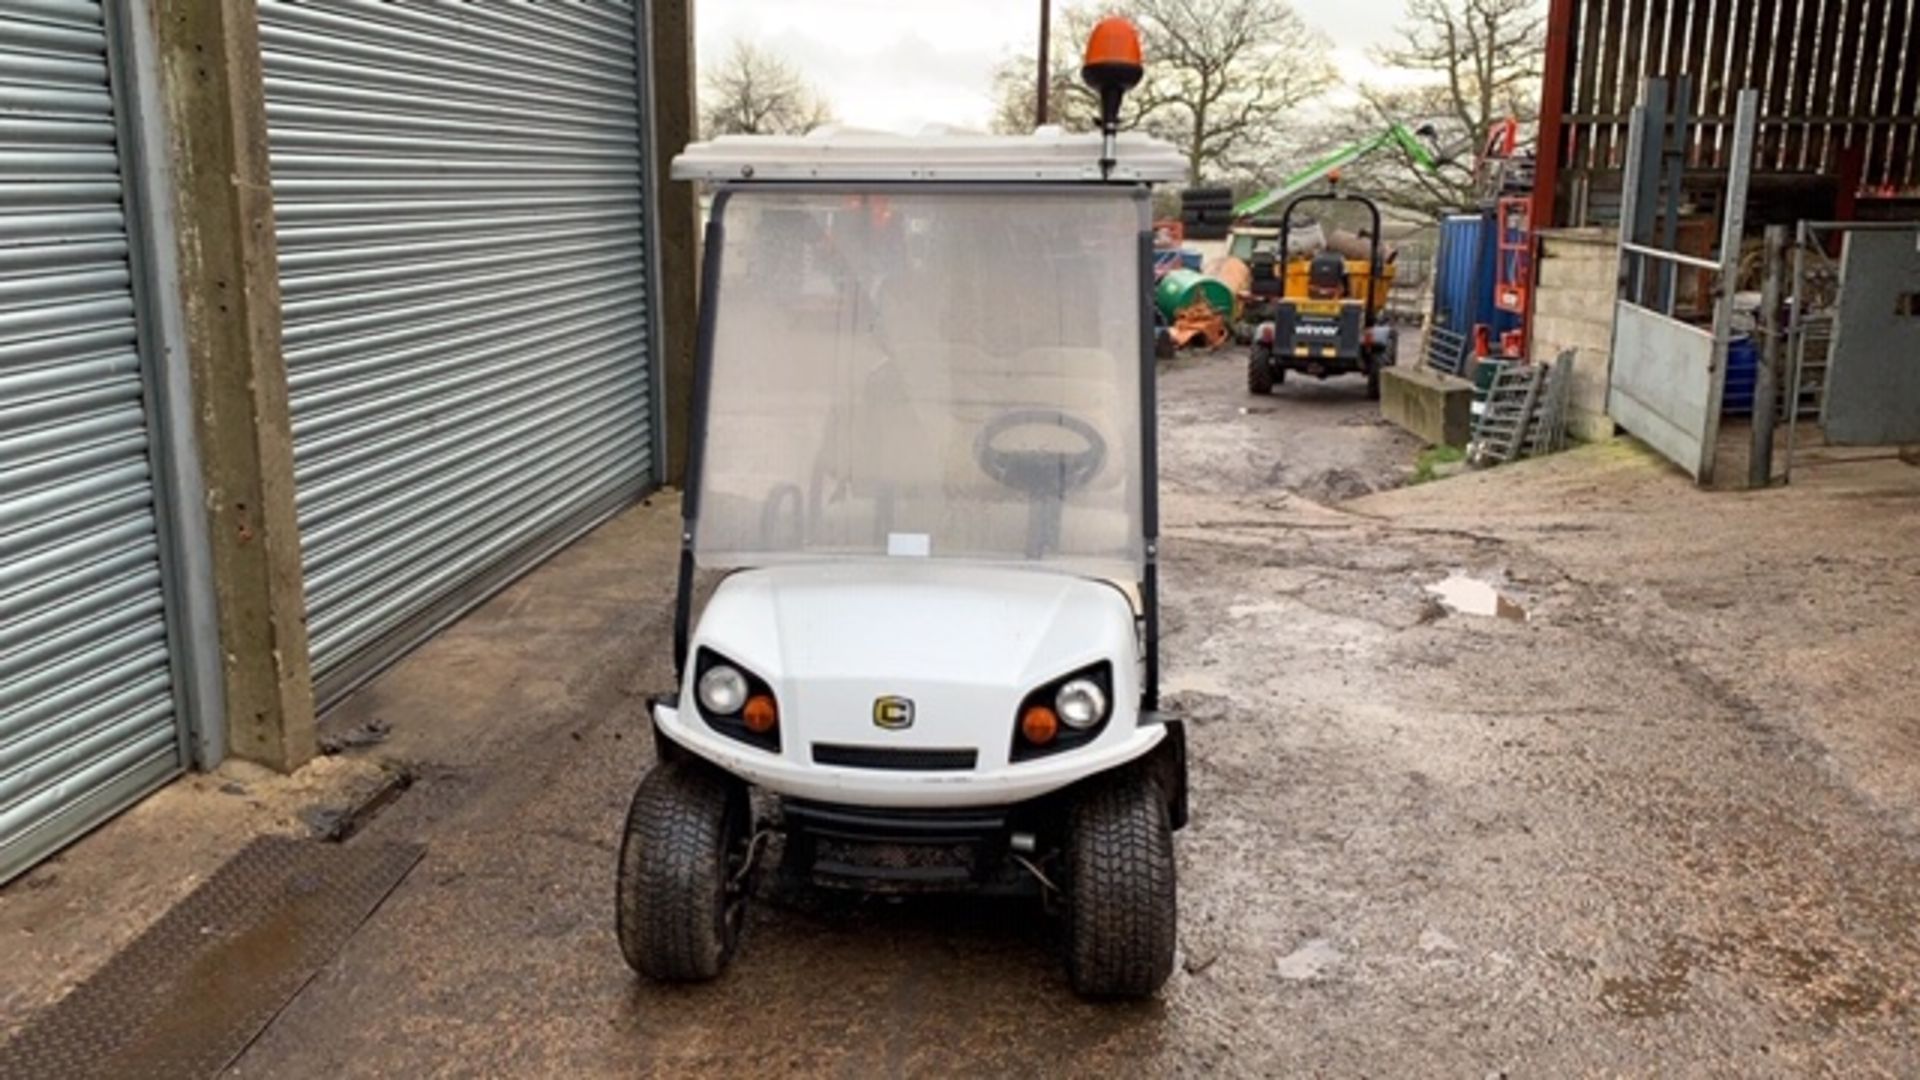 CUSHMAN EZGO SHUTTLE 8 PETROL ENGINED 8 SEATER EVENTS GOLF BUGGY. YEAR 2017 BUILD. DIRECT FROM - Image 2 of 4